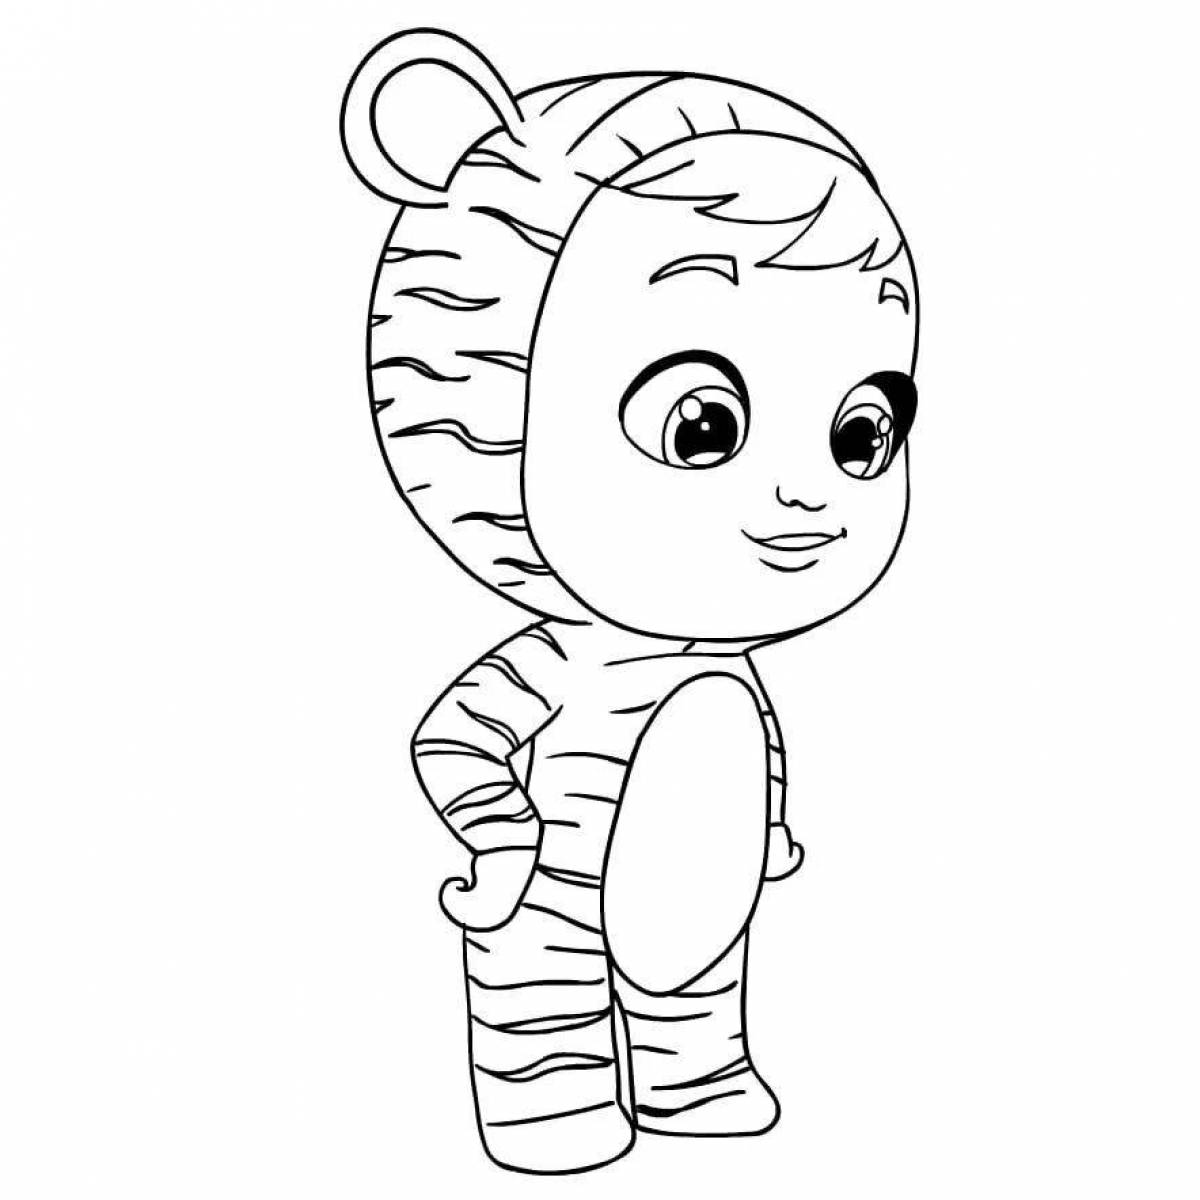 Loving baby coloring book